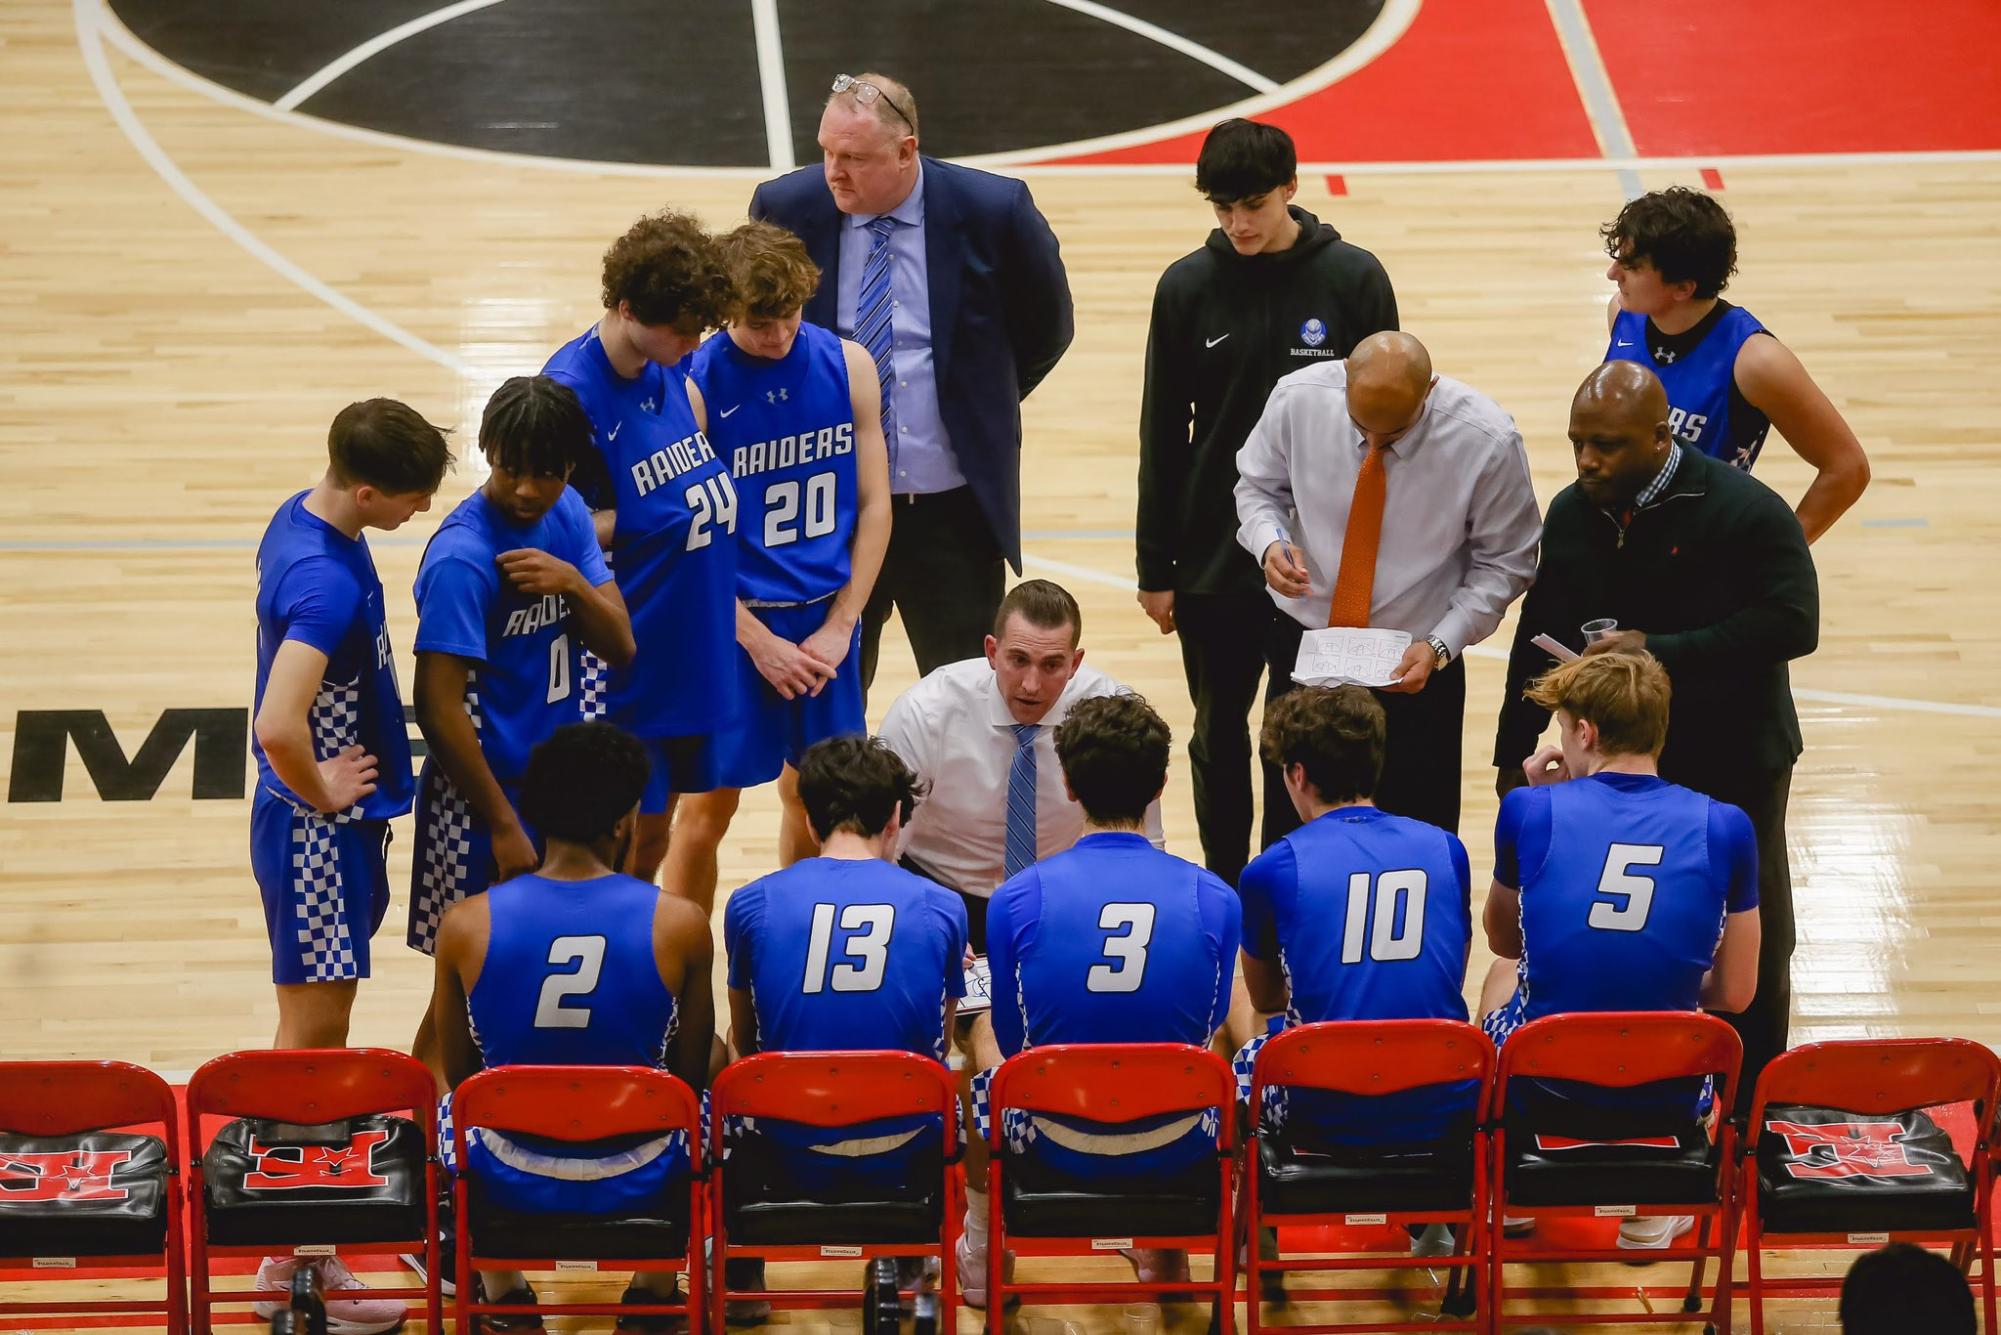 Players huddle around coach Steven Siracusa during a timeout against the Elizabeth Minutemen on Feb. 12. The SPF Boys Basketball team finished the 22-23 season with a record of 16-10 and made it to the sectional quarterfinals.